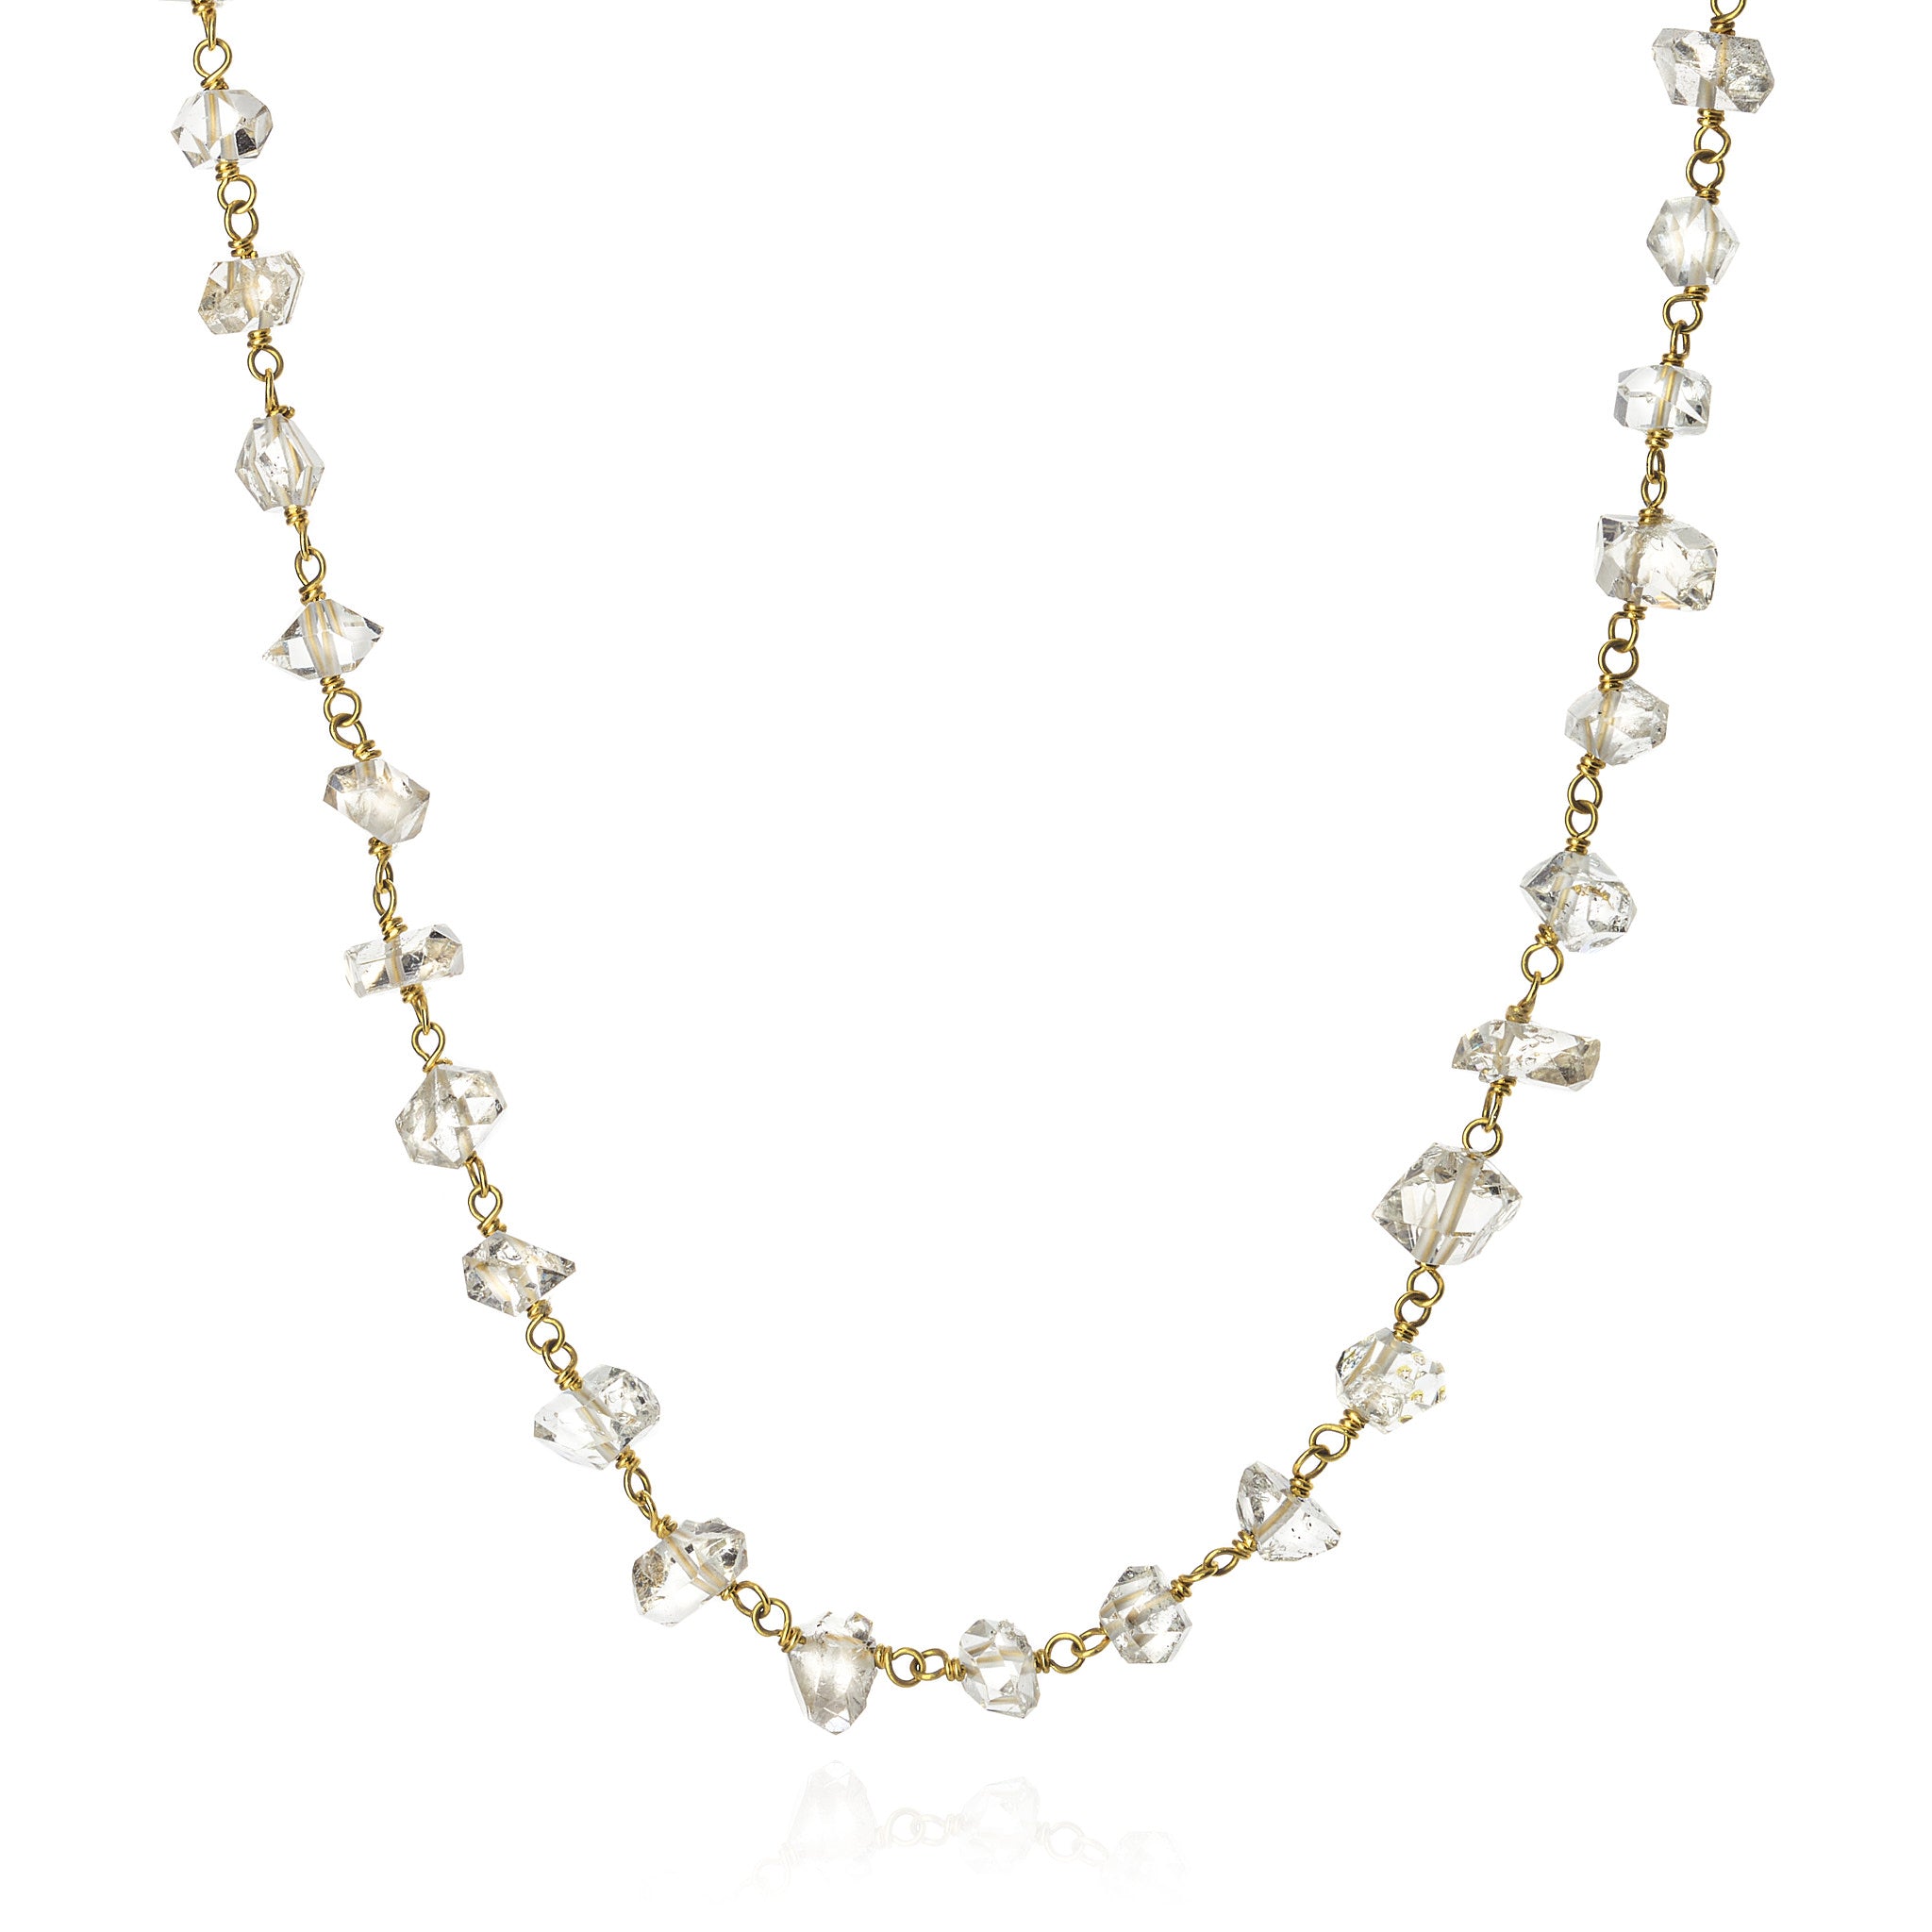 Herkimer diamond necklace on 18k yellow gold chain.